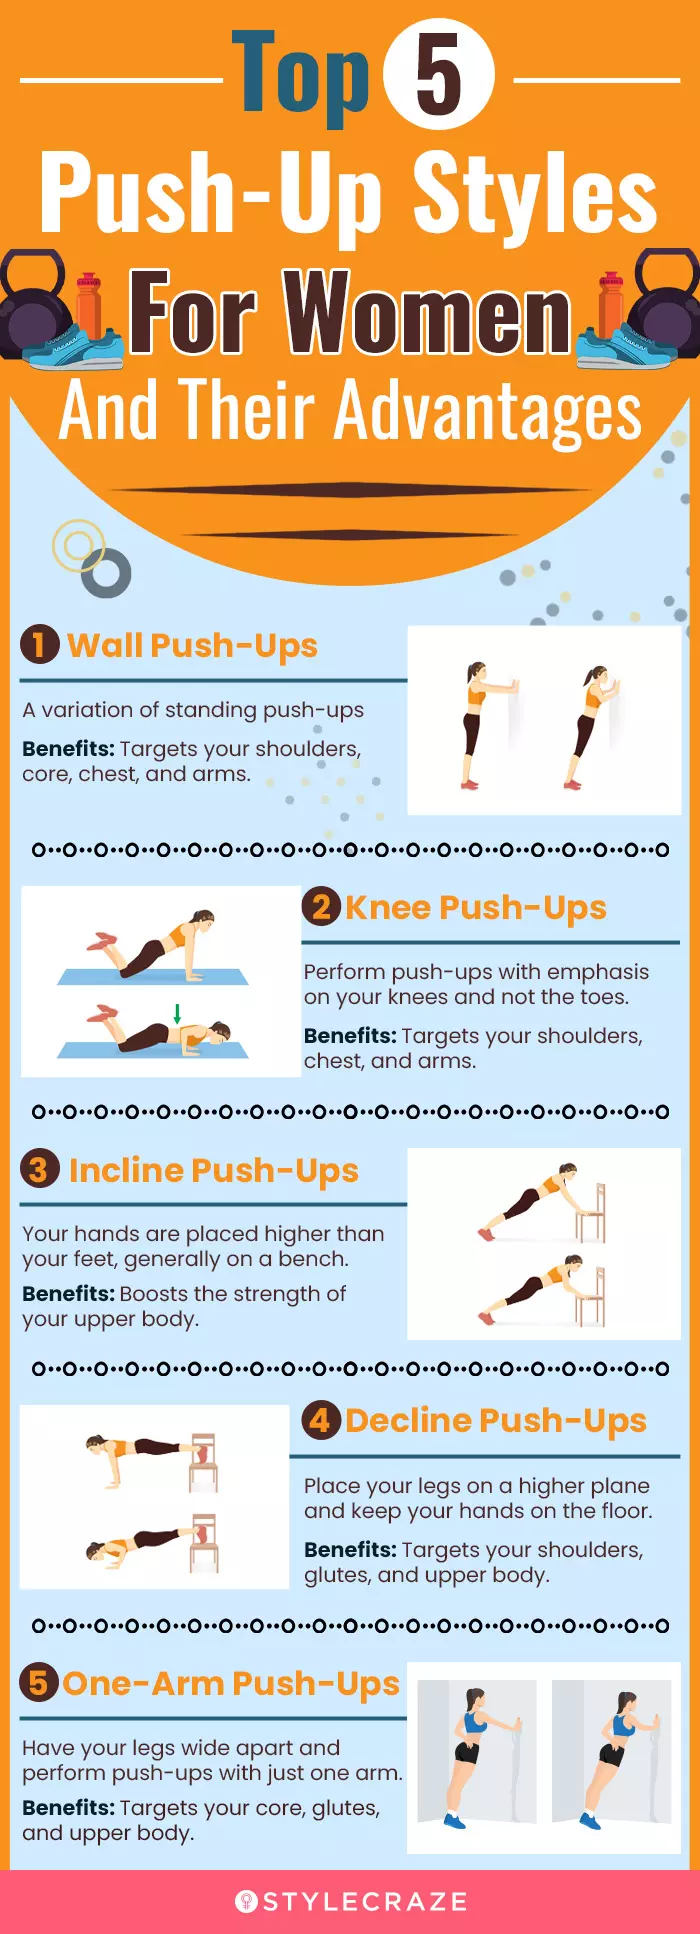 top 5 push up styles for women and their advantages (infographic)